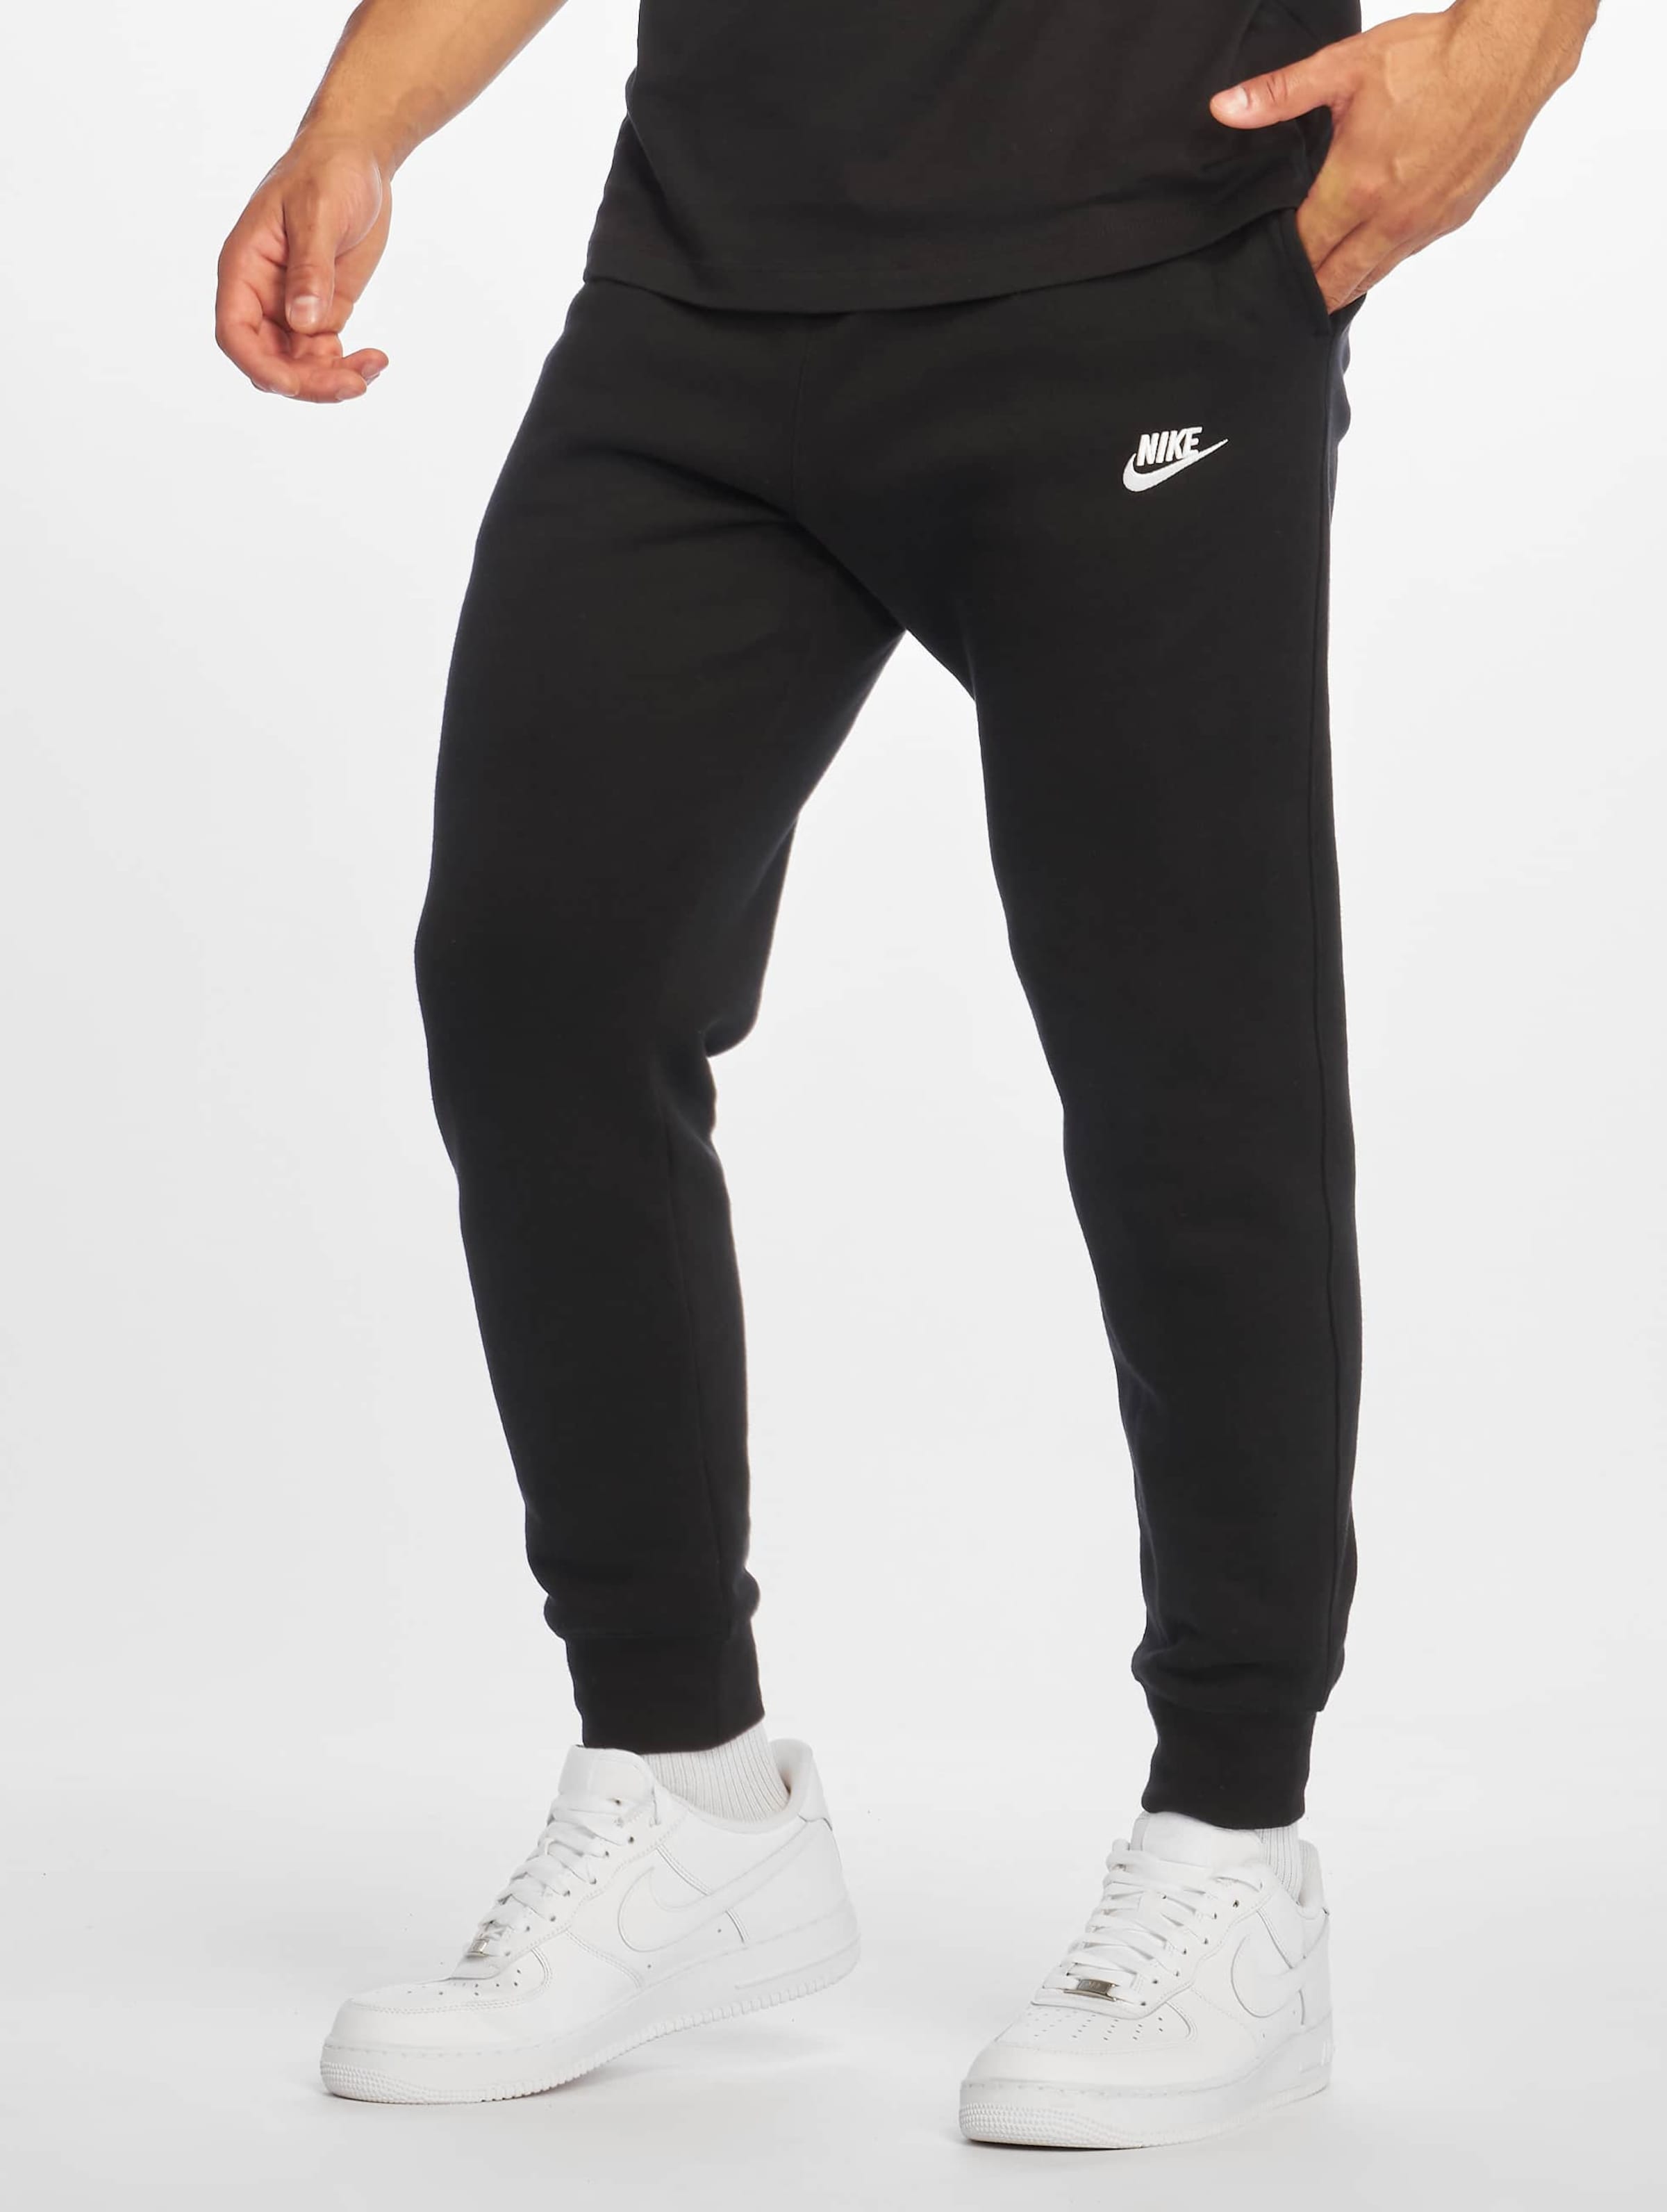 Nike Fashion, buy online cheaply in the Nike online shop